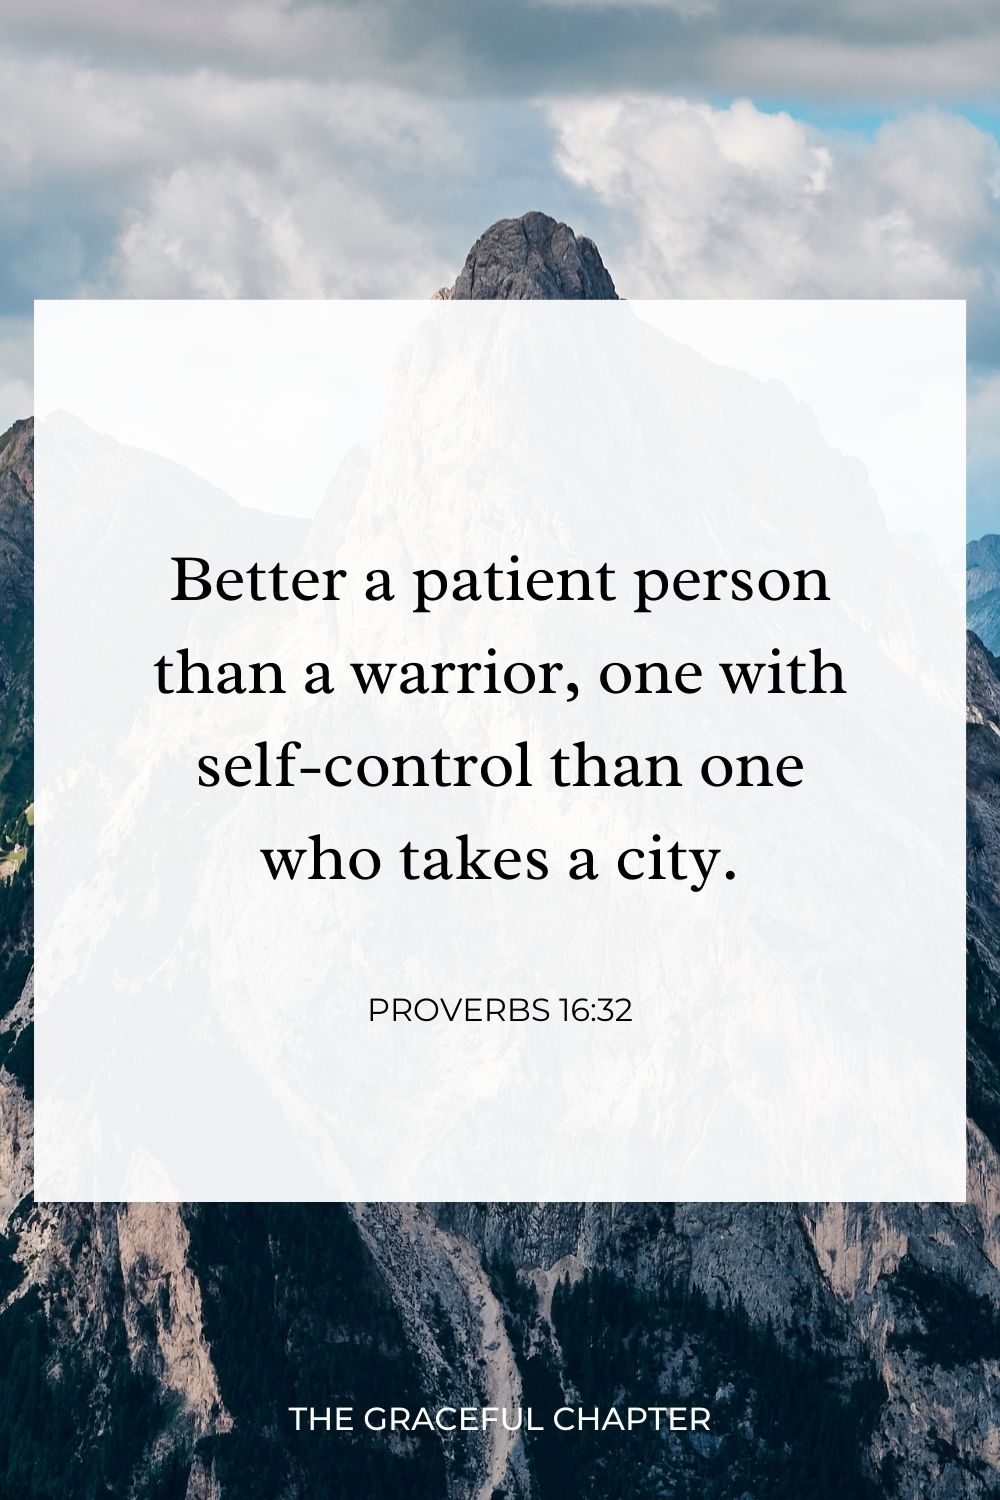 Better a patient person than a warrior, one with self-control than one who takes a city. Proverbs 16:32